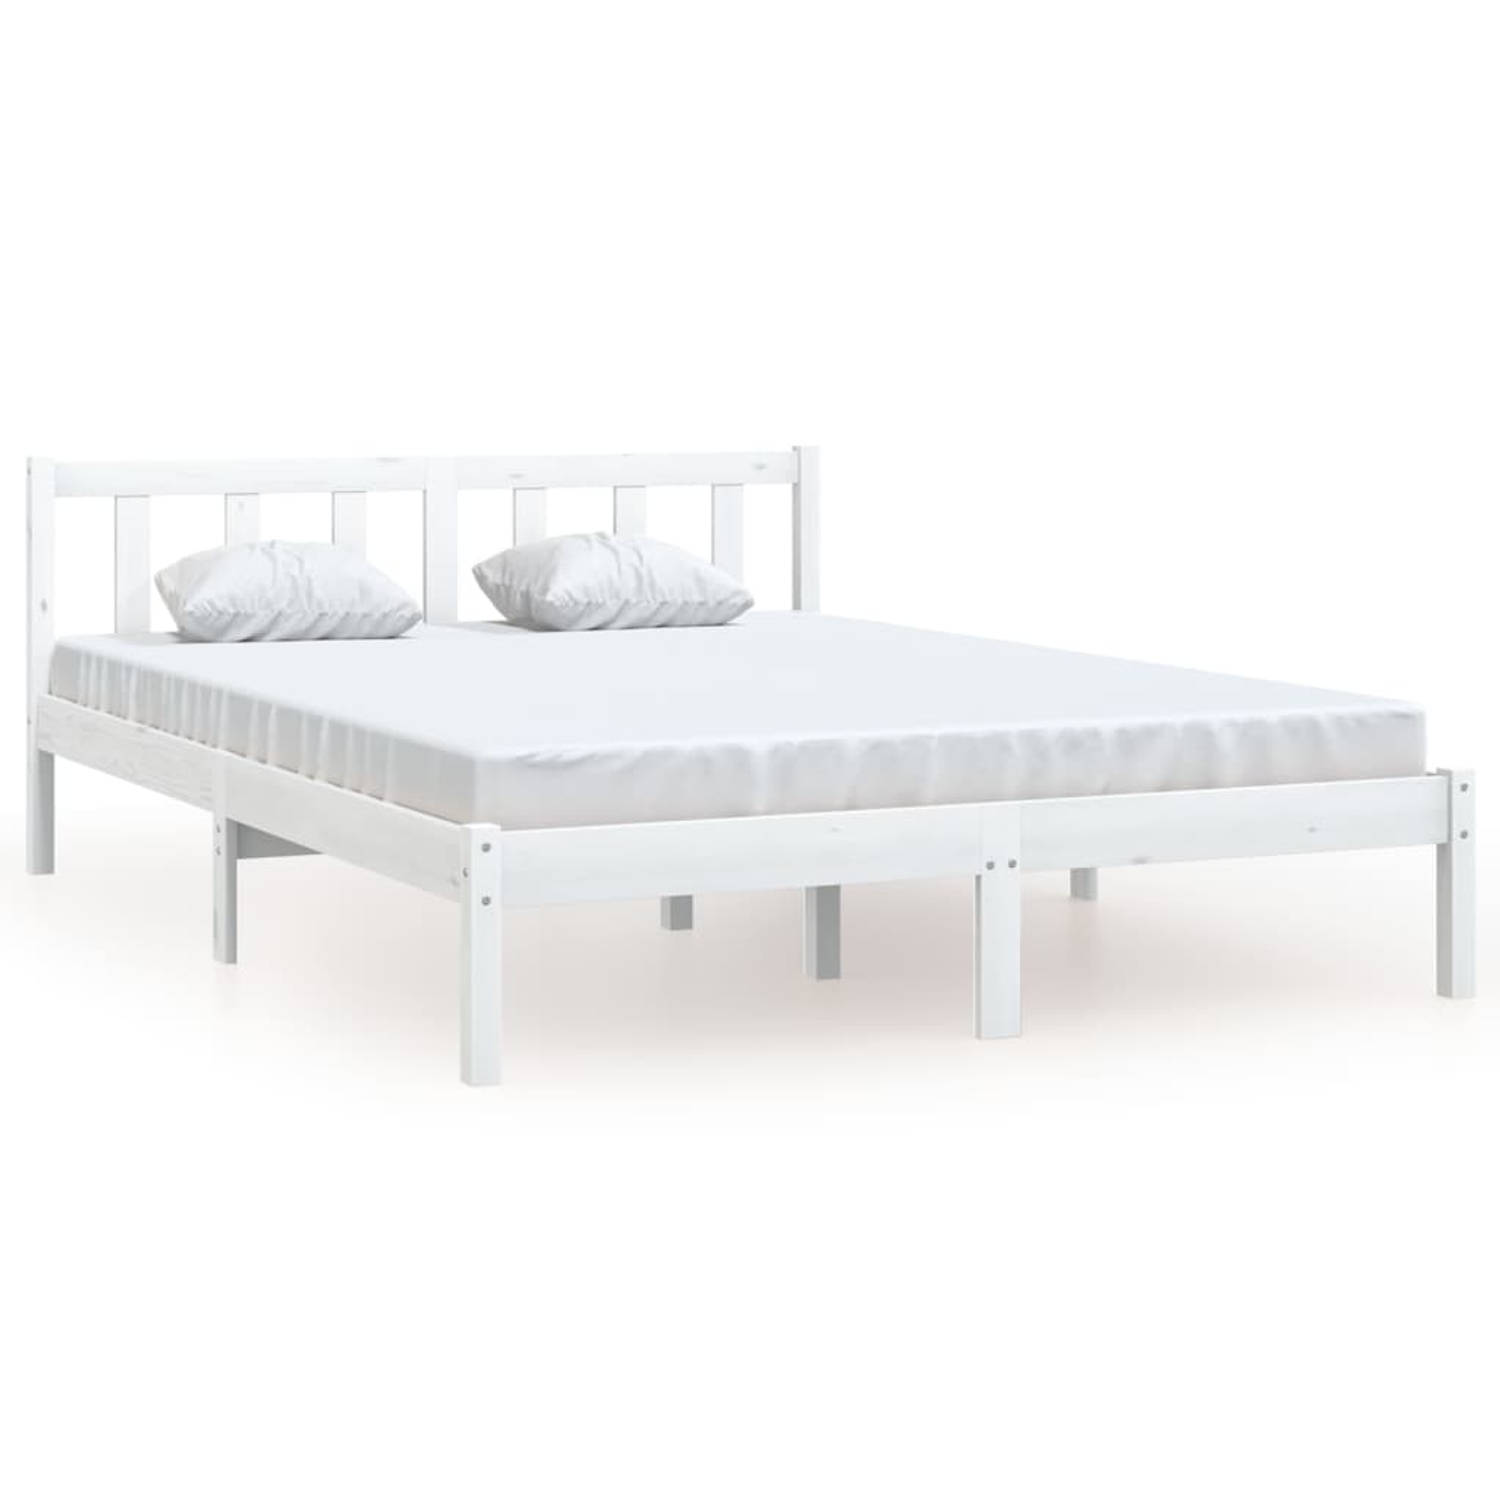 The Living Store Bedframe massief grenenhout wit 160x200 cm - Bedframe - Bedframe - Bed Frame - Bed Frames - Bed - Bedden - 1-persoonsbed - 1-persoonsbedden - Eenpersoons Bed